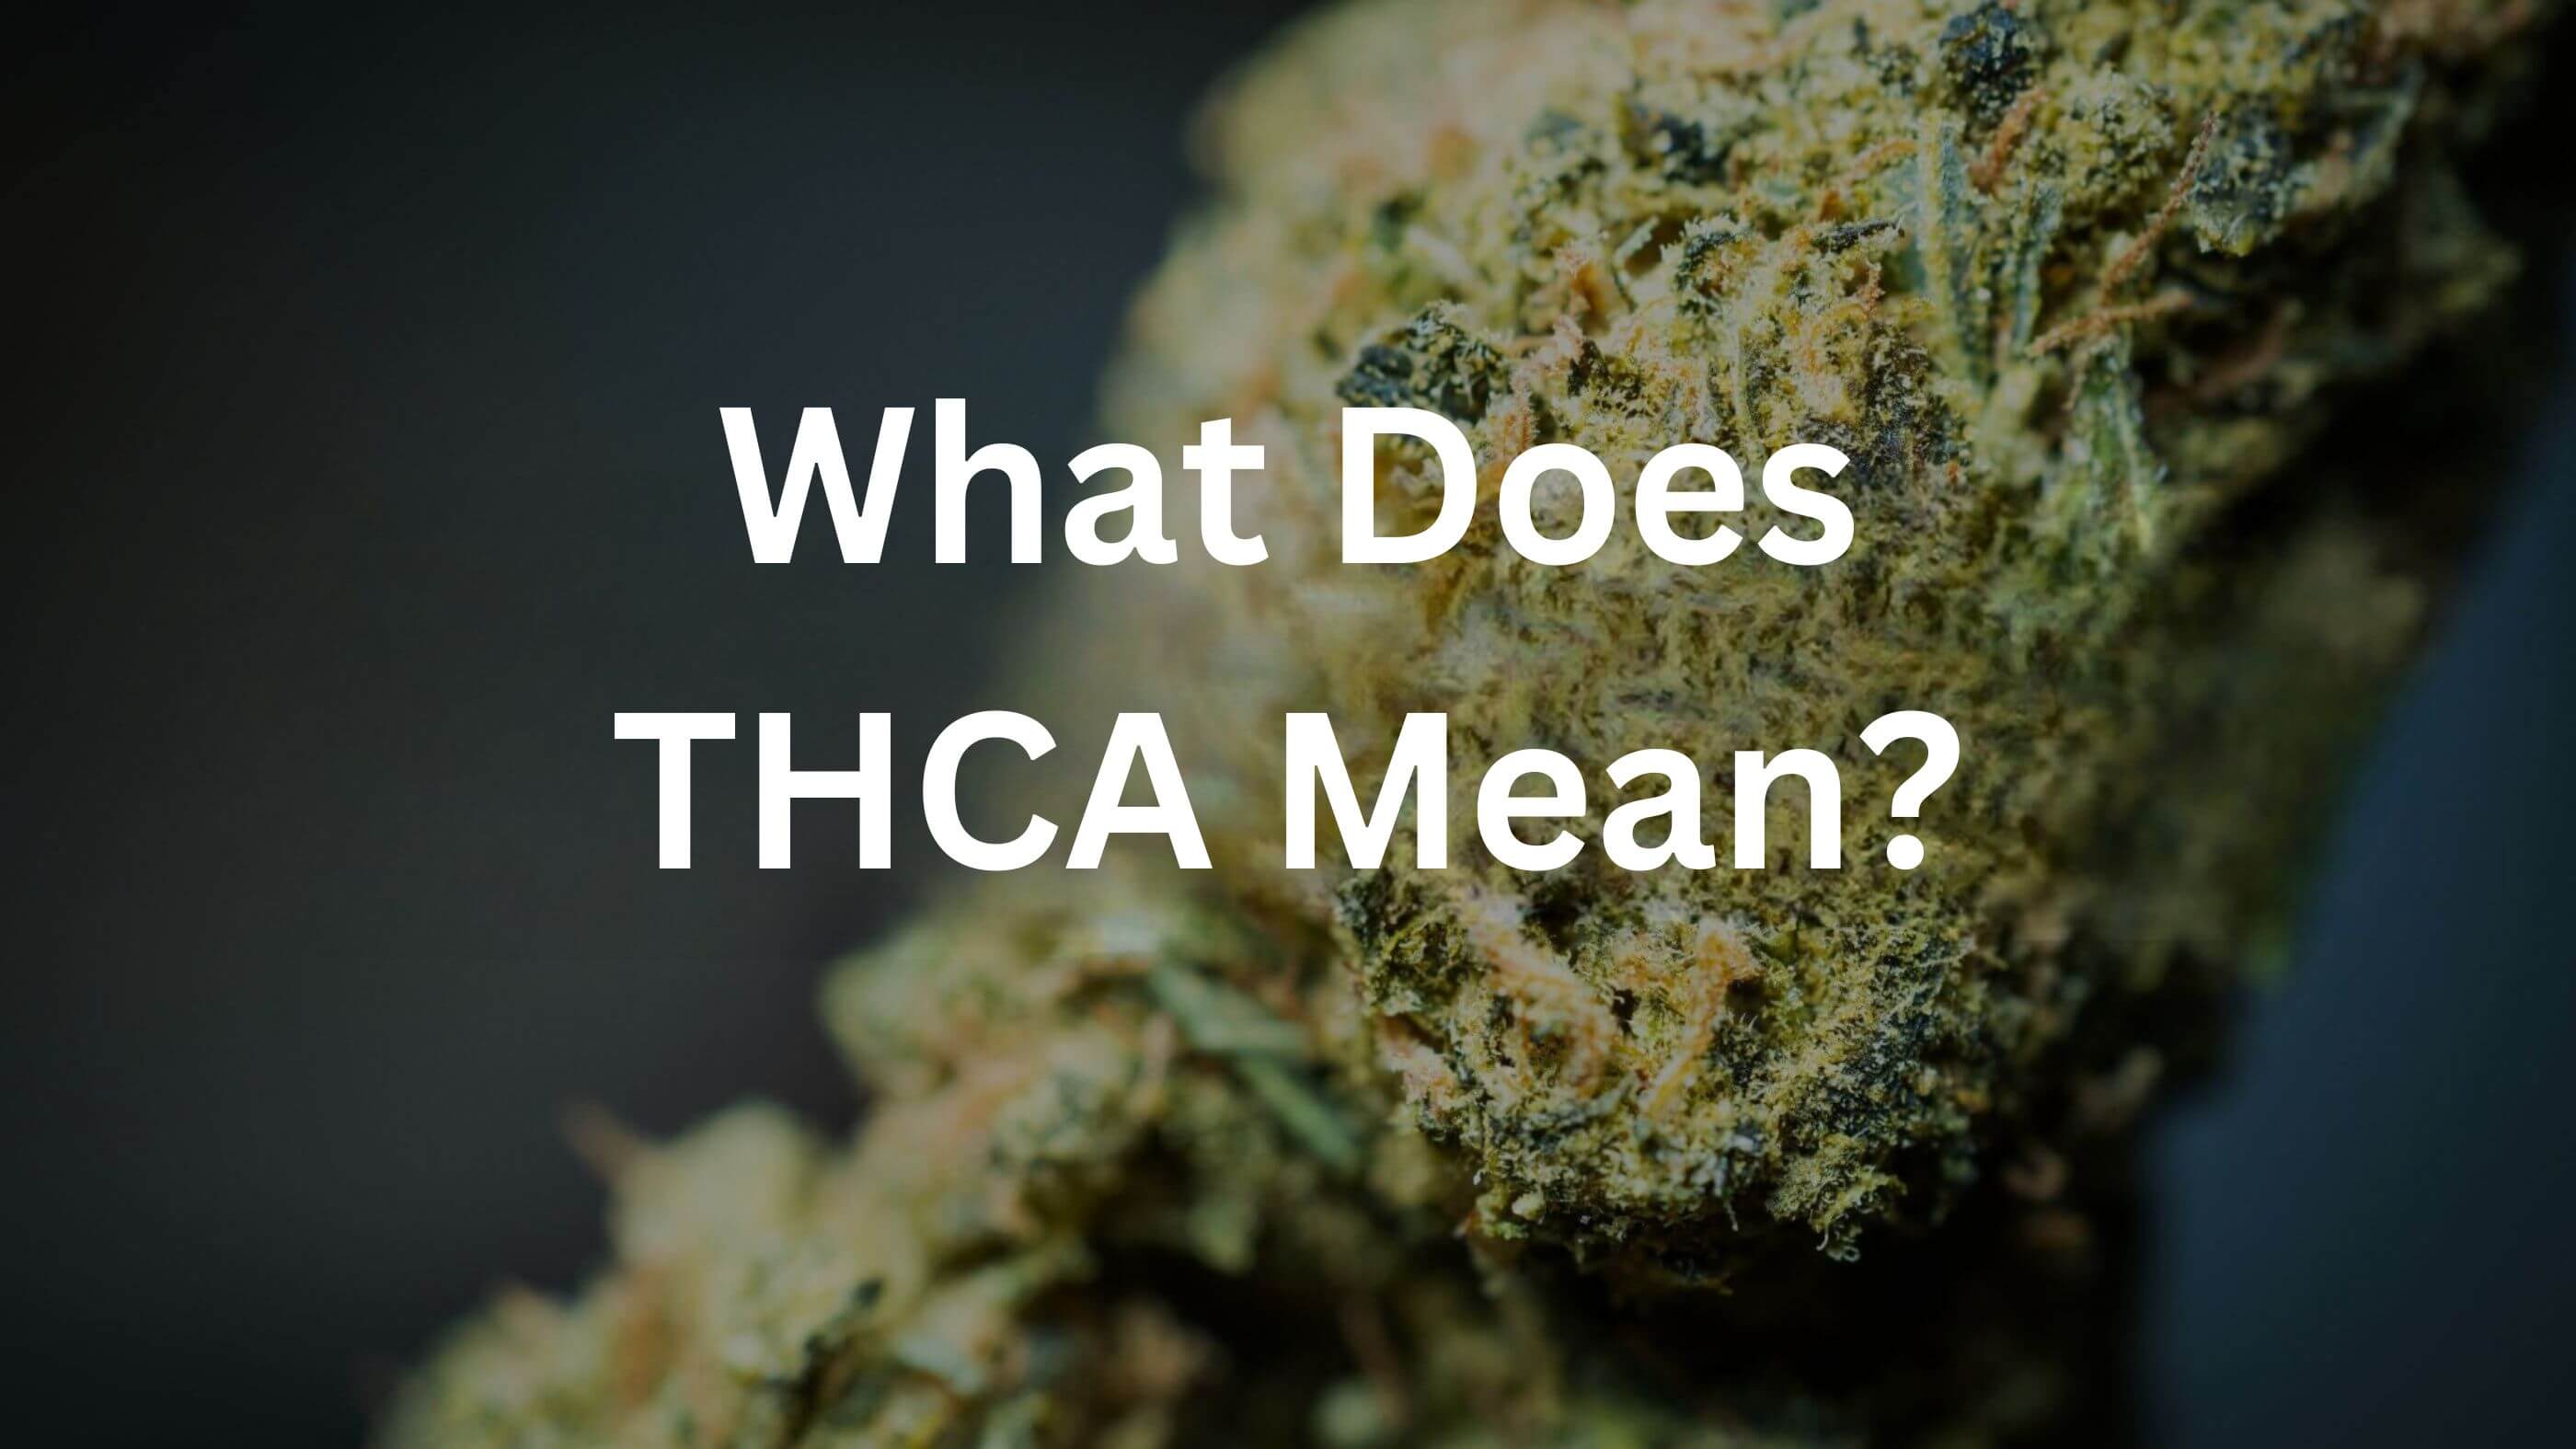 What Does THCA Mean?